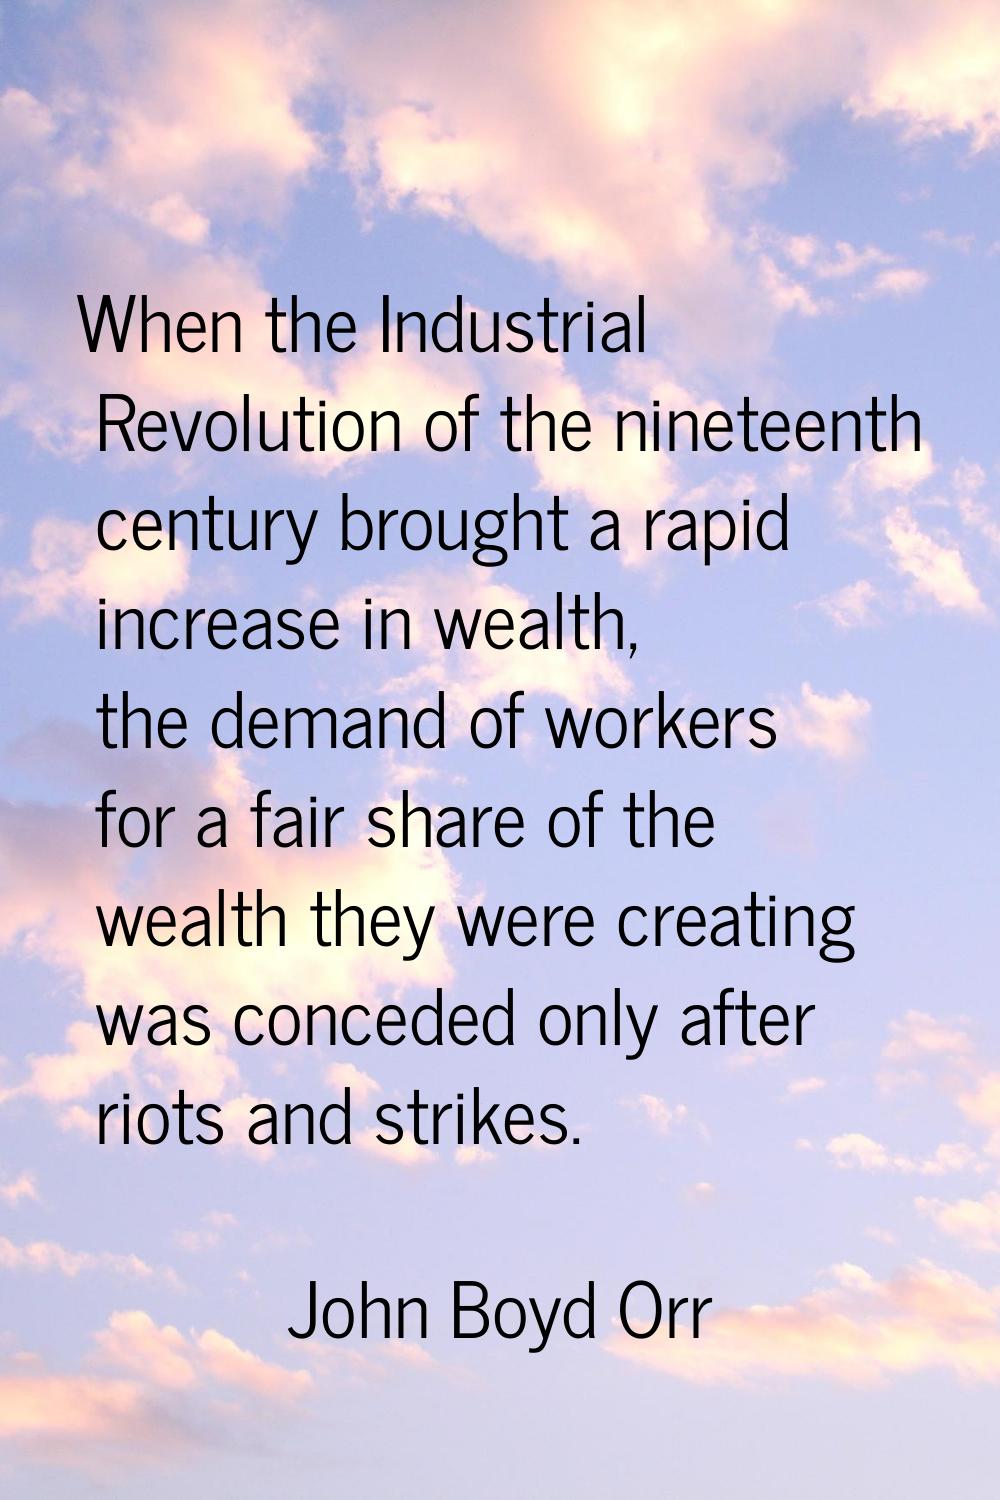 When the Industrial Revolution of the nineteenth century brought a rapid increase in wealth, the de